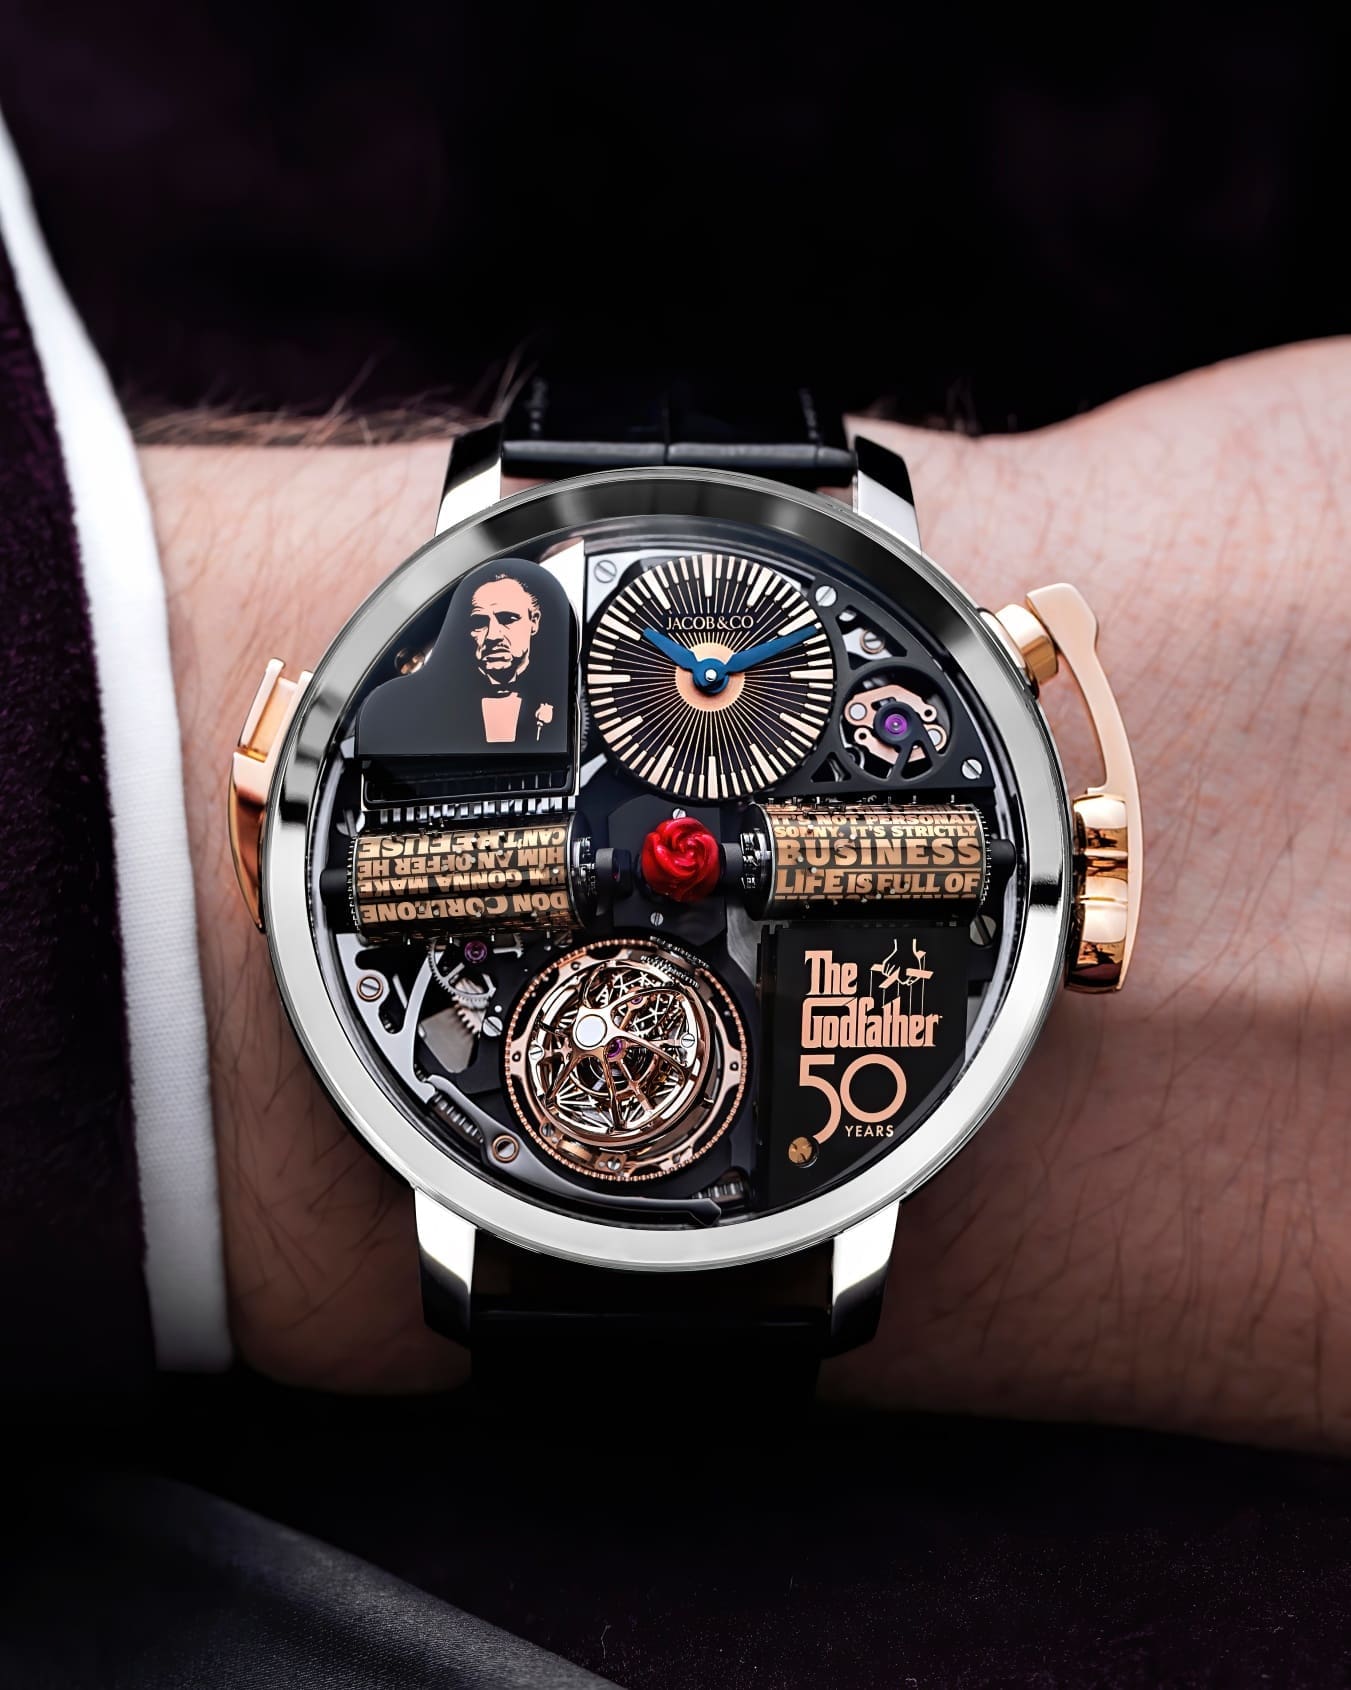 The Opera Godfather 50th Anniversary from Jacob & Co is a horological offer you can’t refuse